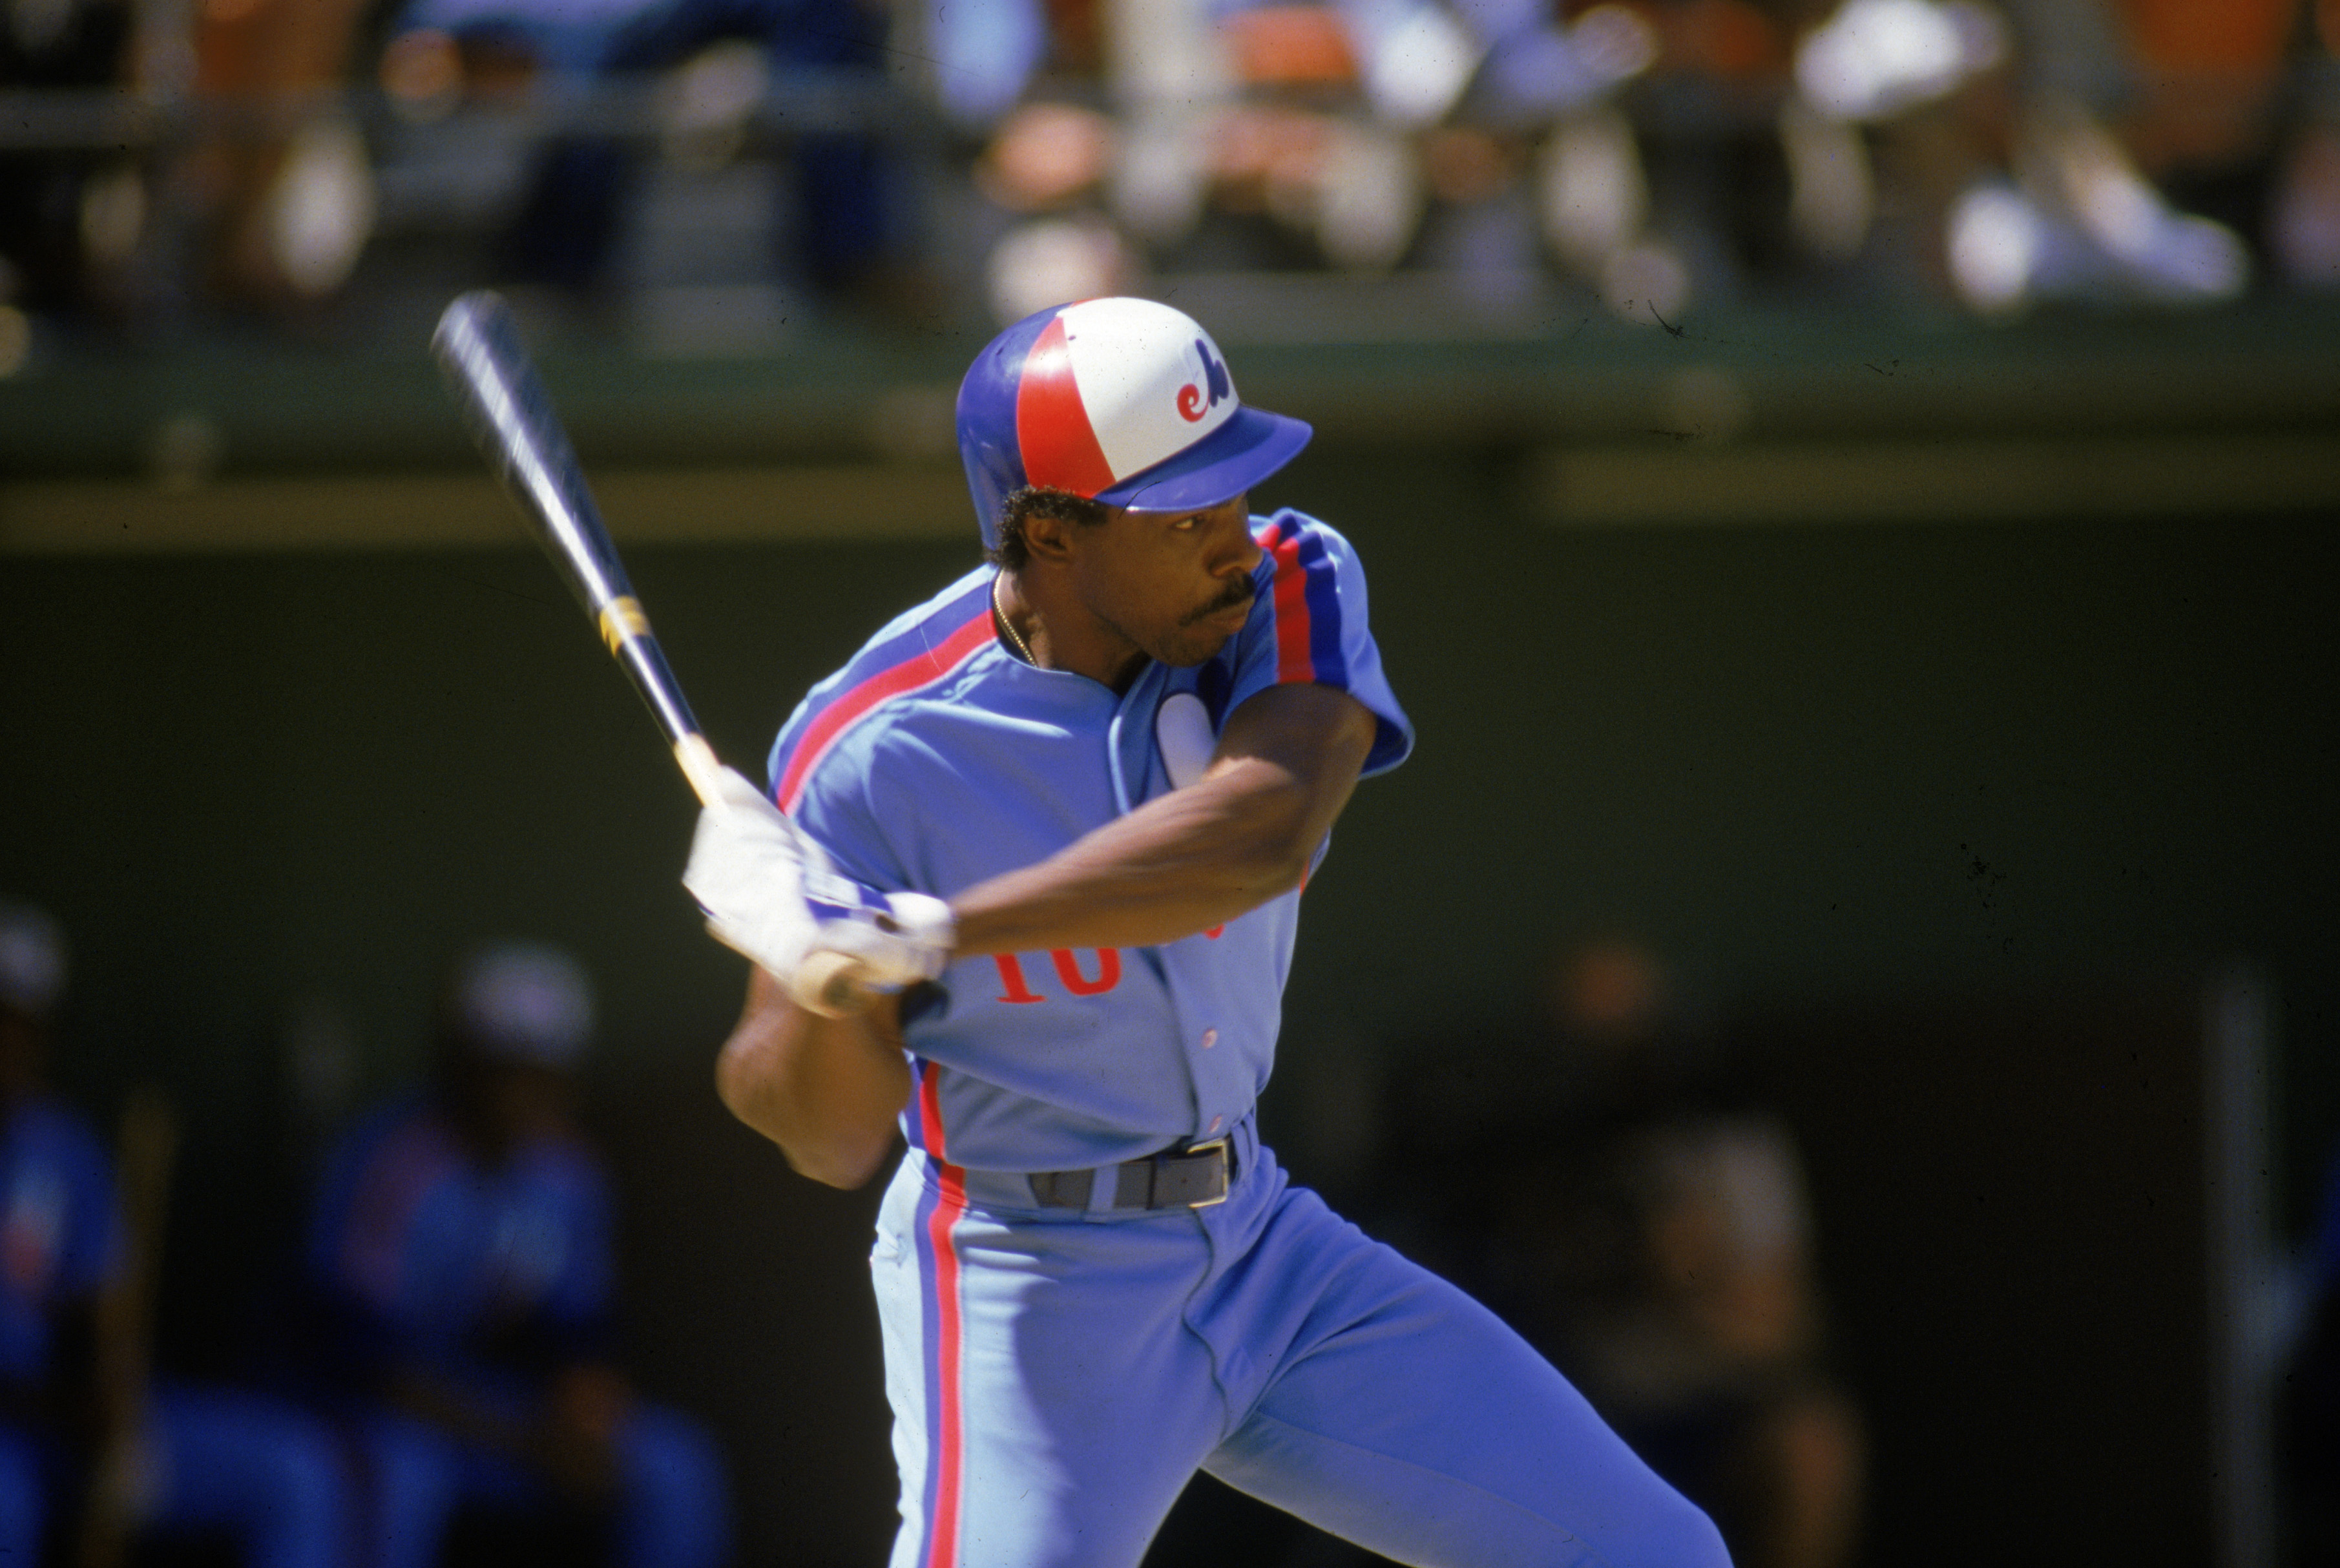 Expos-ed: Andre Dawson and the 25 Greatest Montreal Expos, News, Scores,  Highlights, Stats, and Rumors